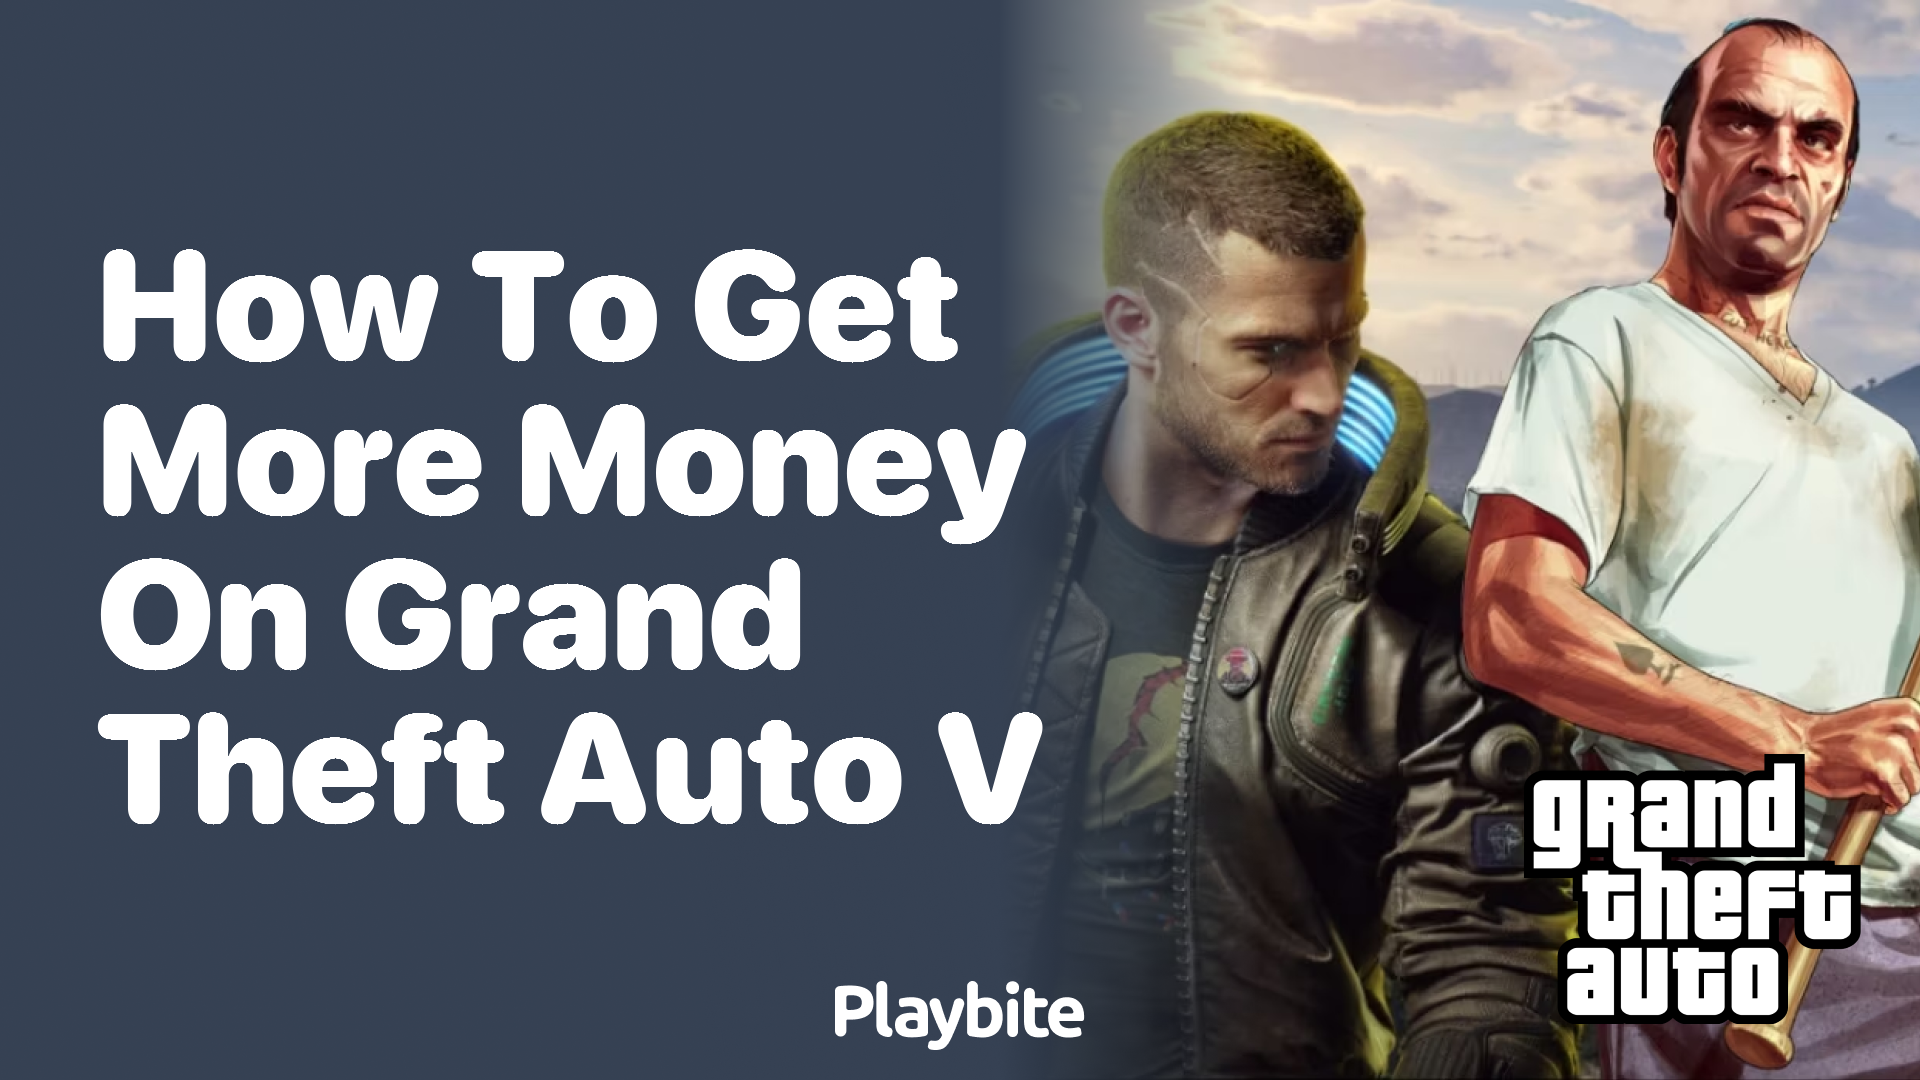 How to get more money on Grand Theft Auto V